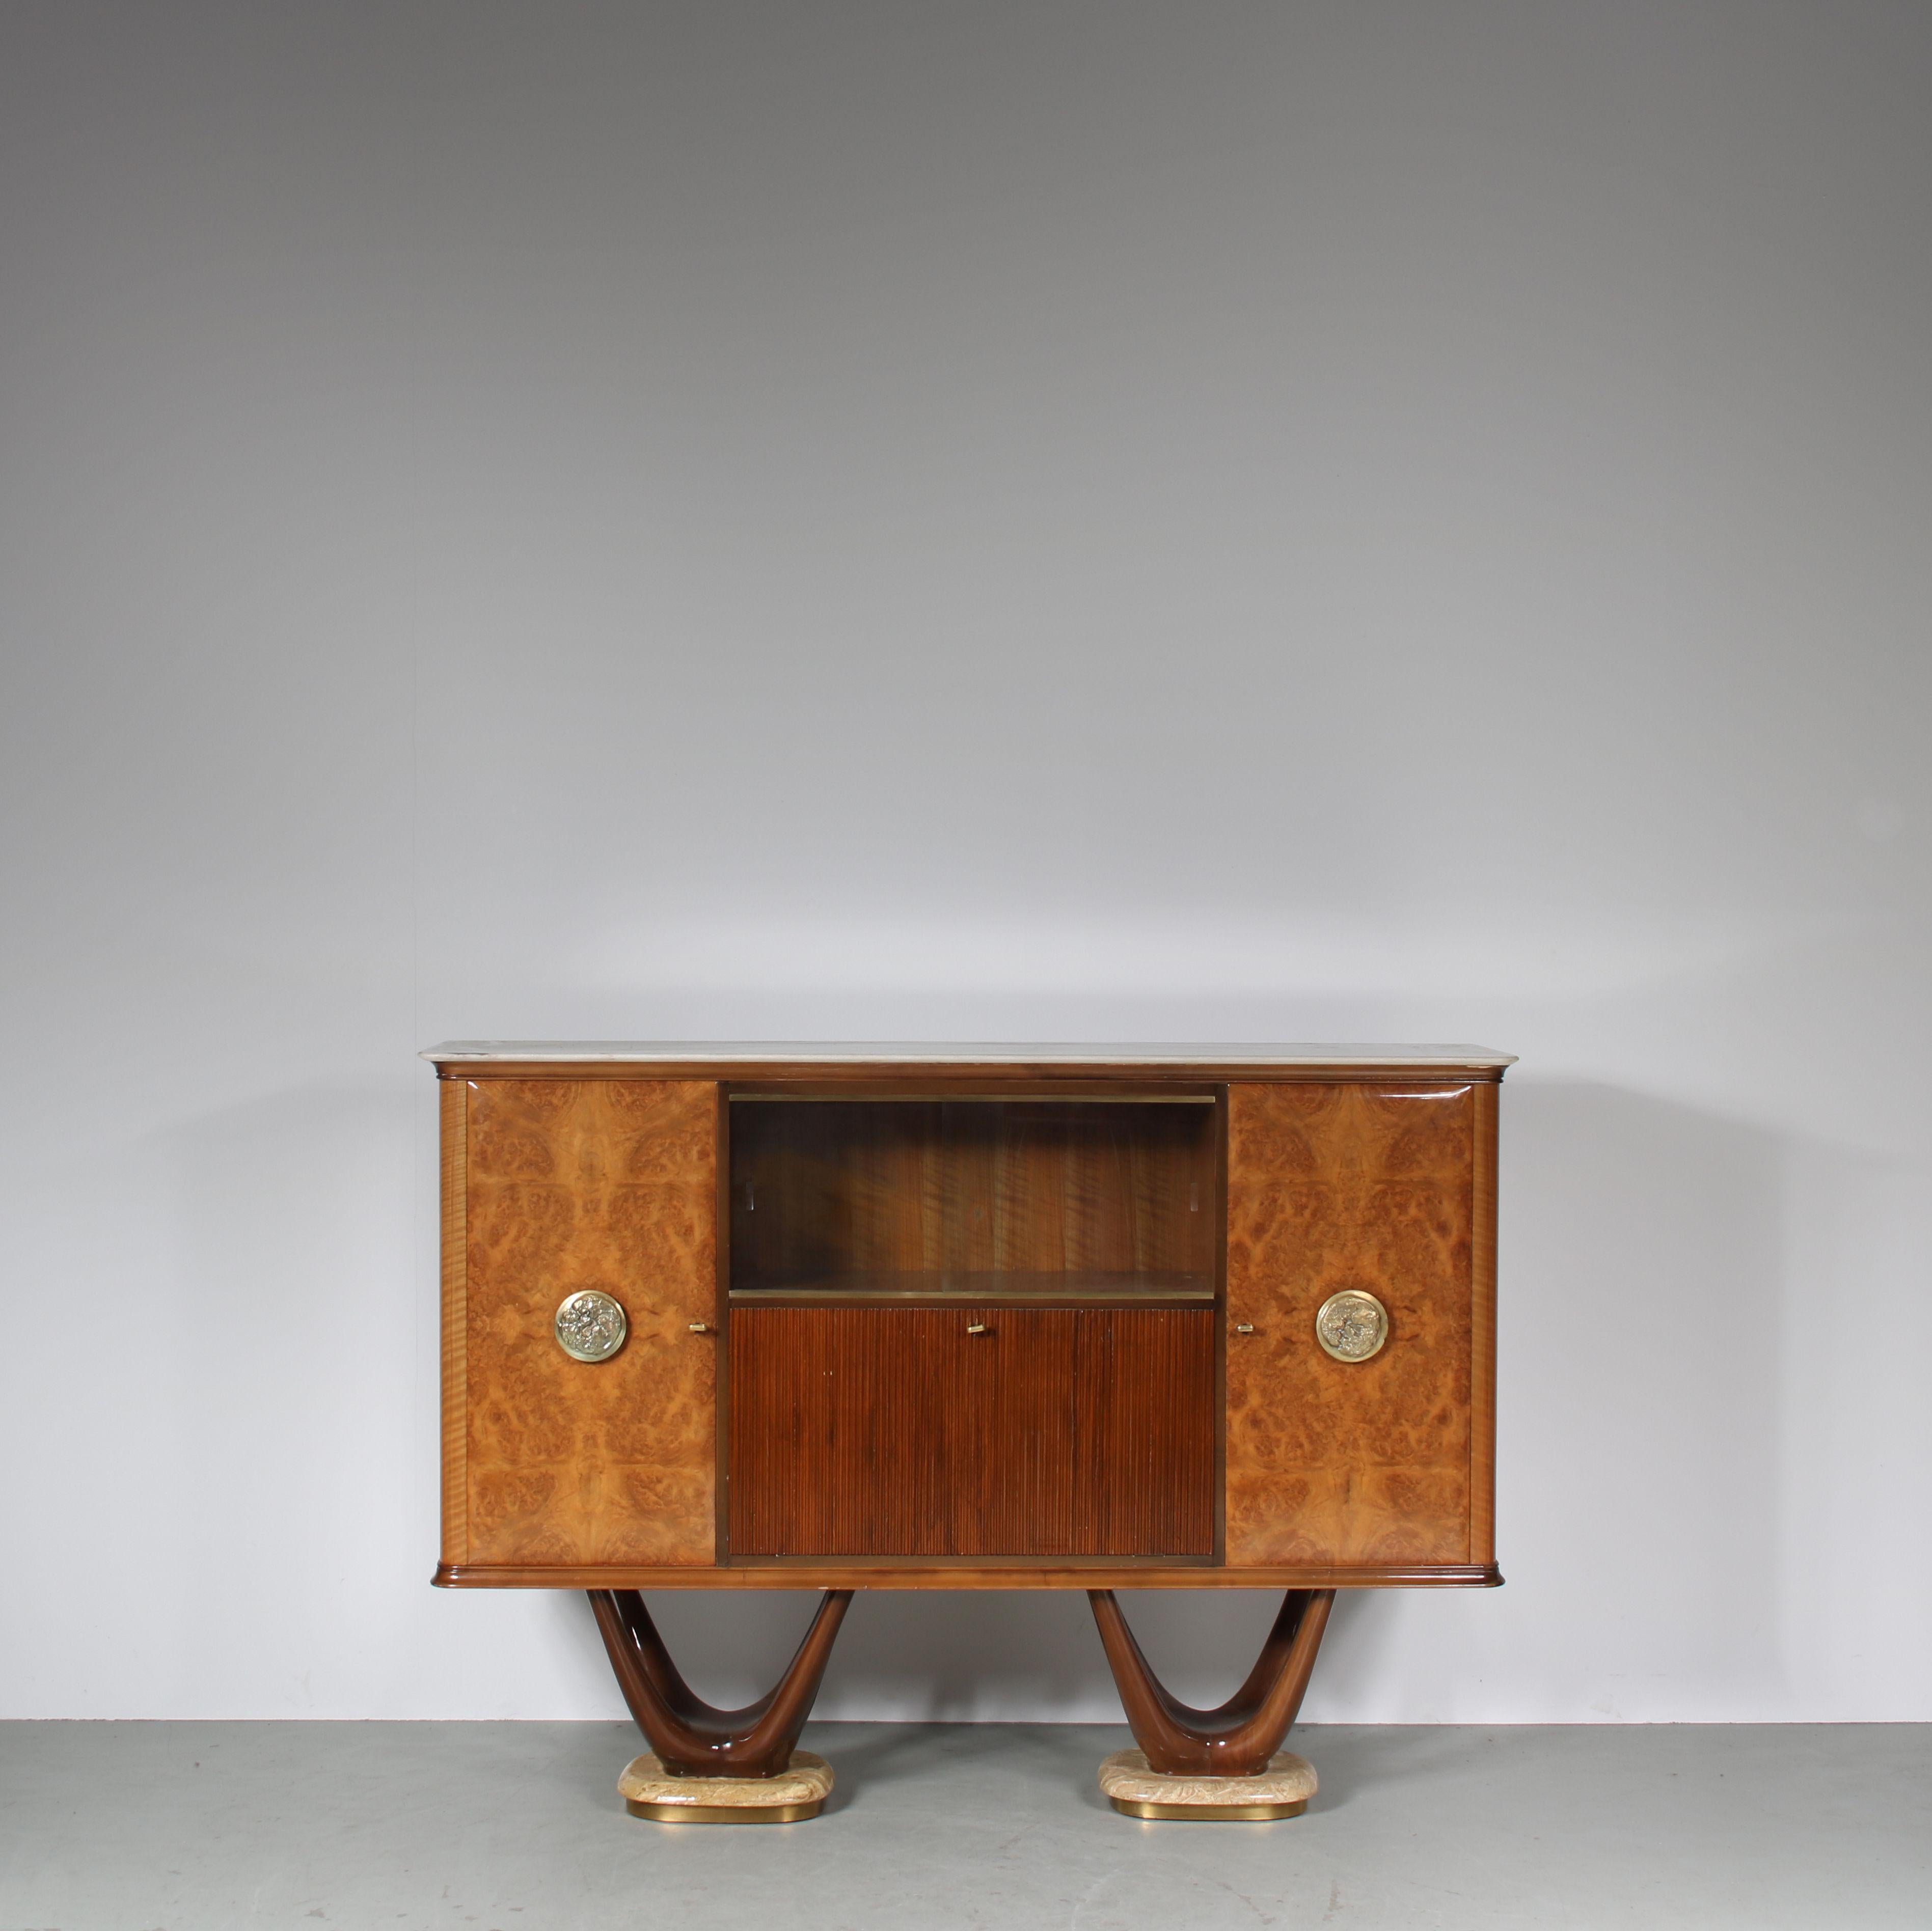 An impressive sideboard by Fratelli Turri from Italy, manufactured around 1950.

This quality piece is made of high quality burlwood. This materials provides a beautiful pattern in the wood and has a wonderful gloss finish. Bronze door knobs, marble